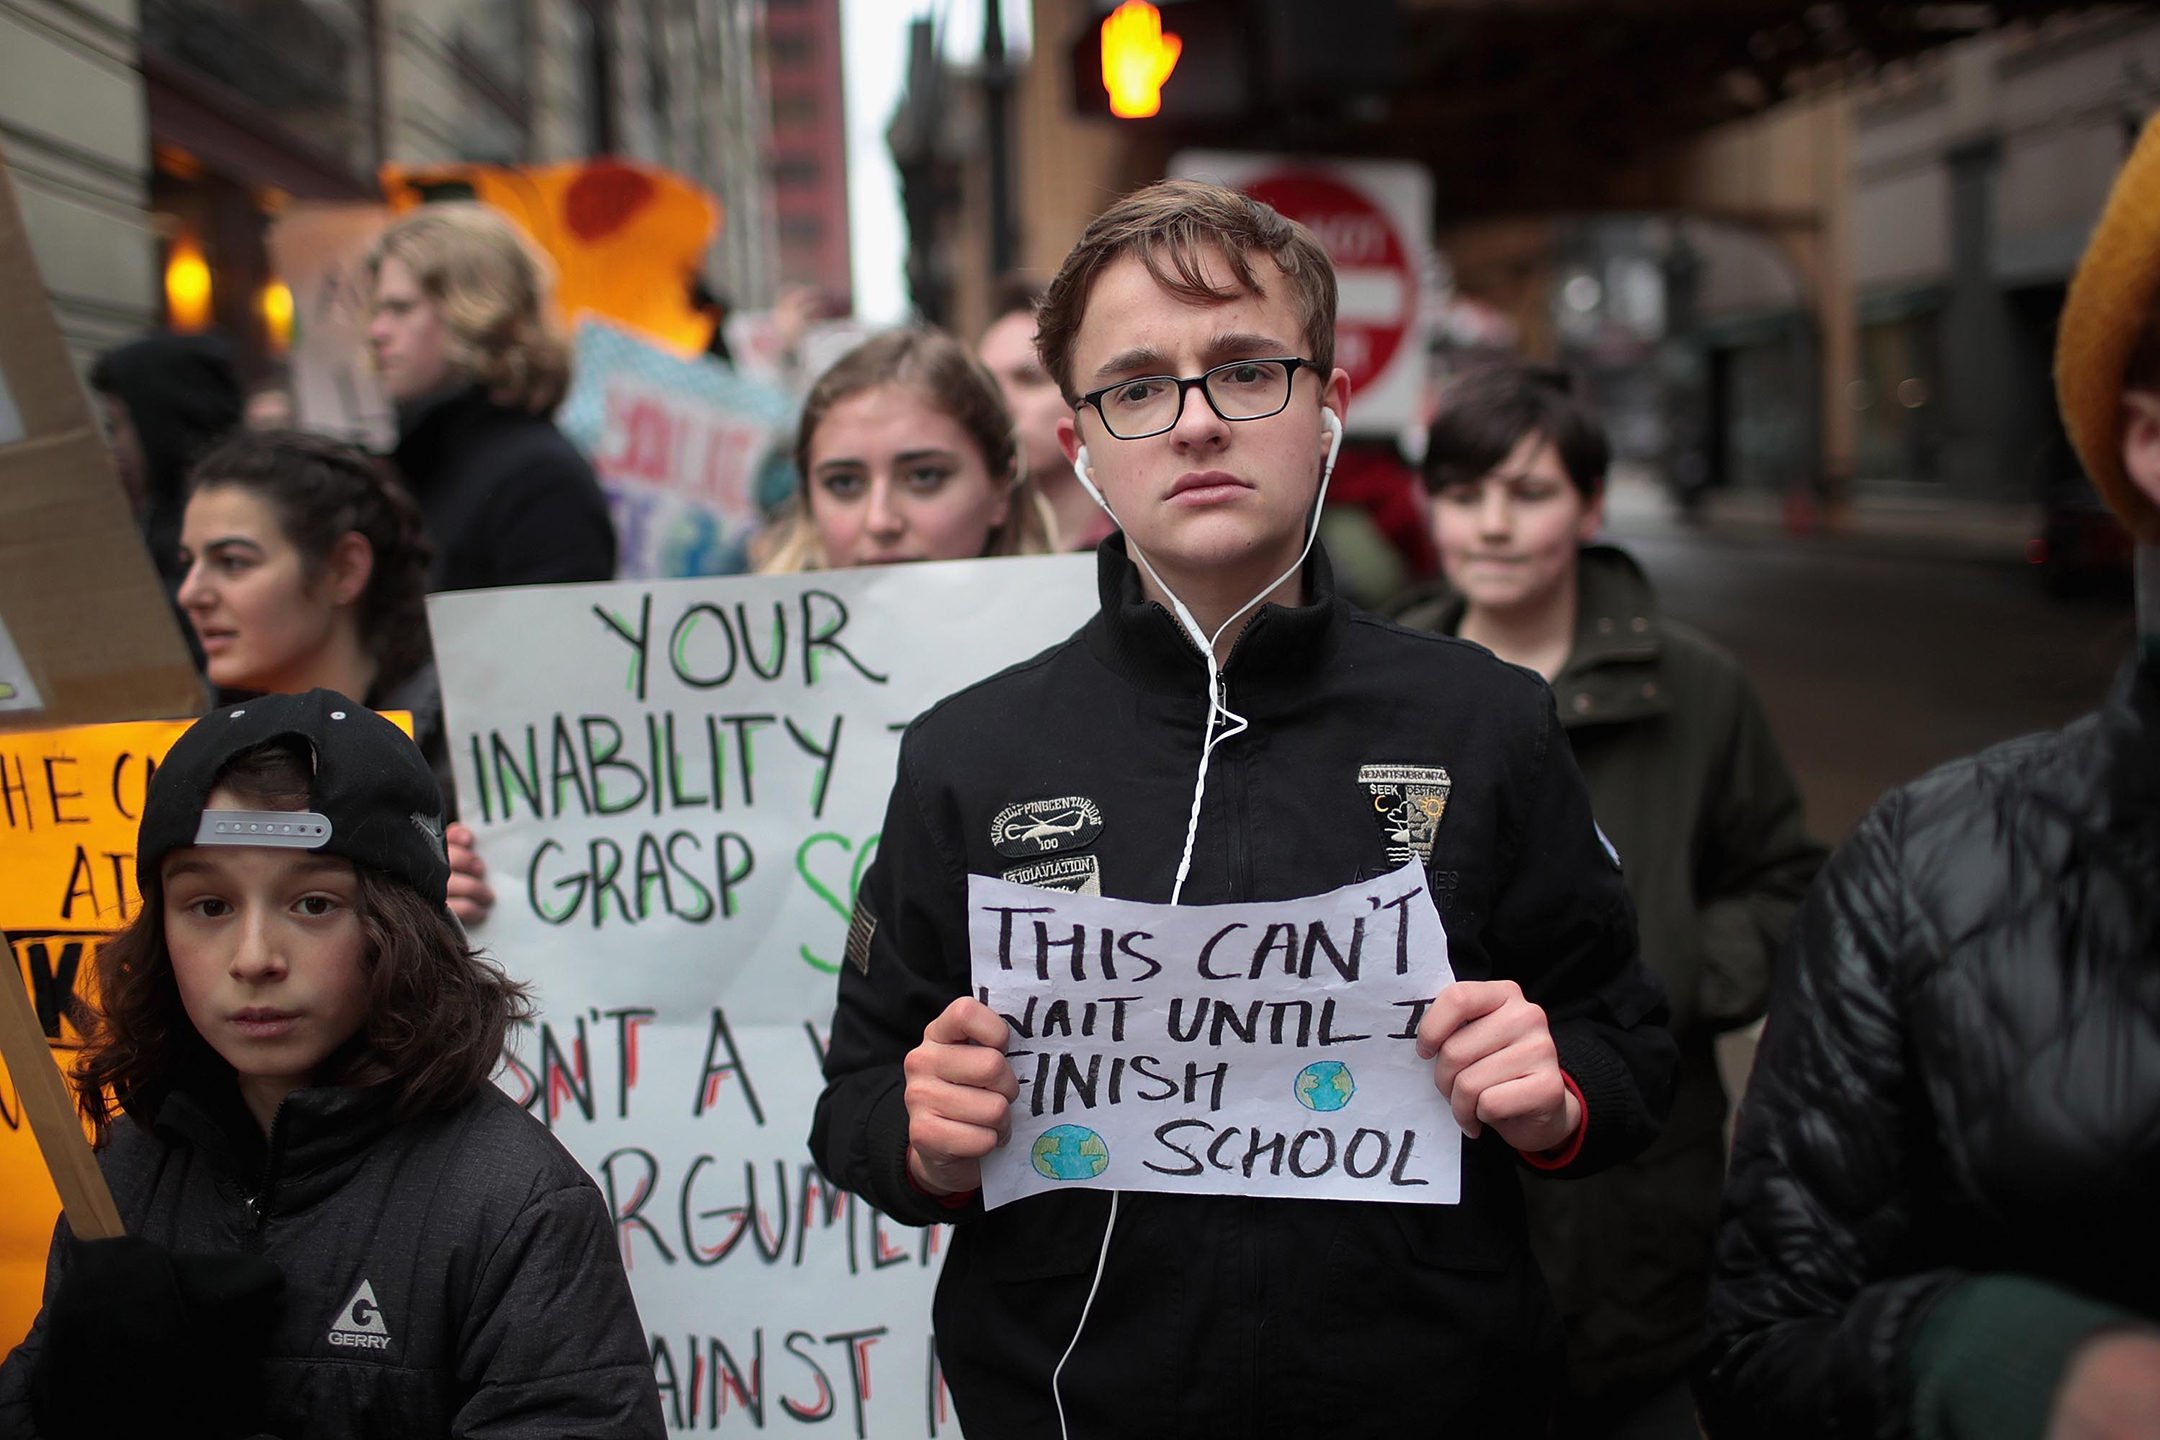 College students at a protest, a young man in the front of the group with glasses holding a sign that reads "This can't wait until I finish school"